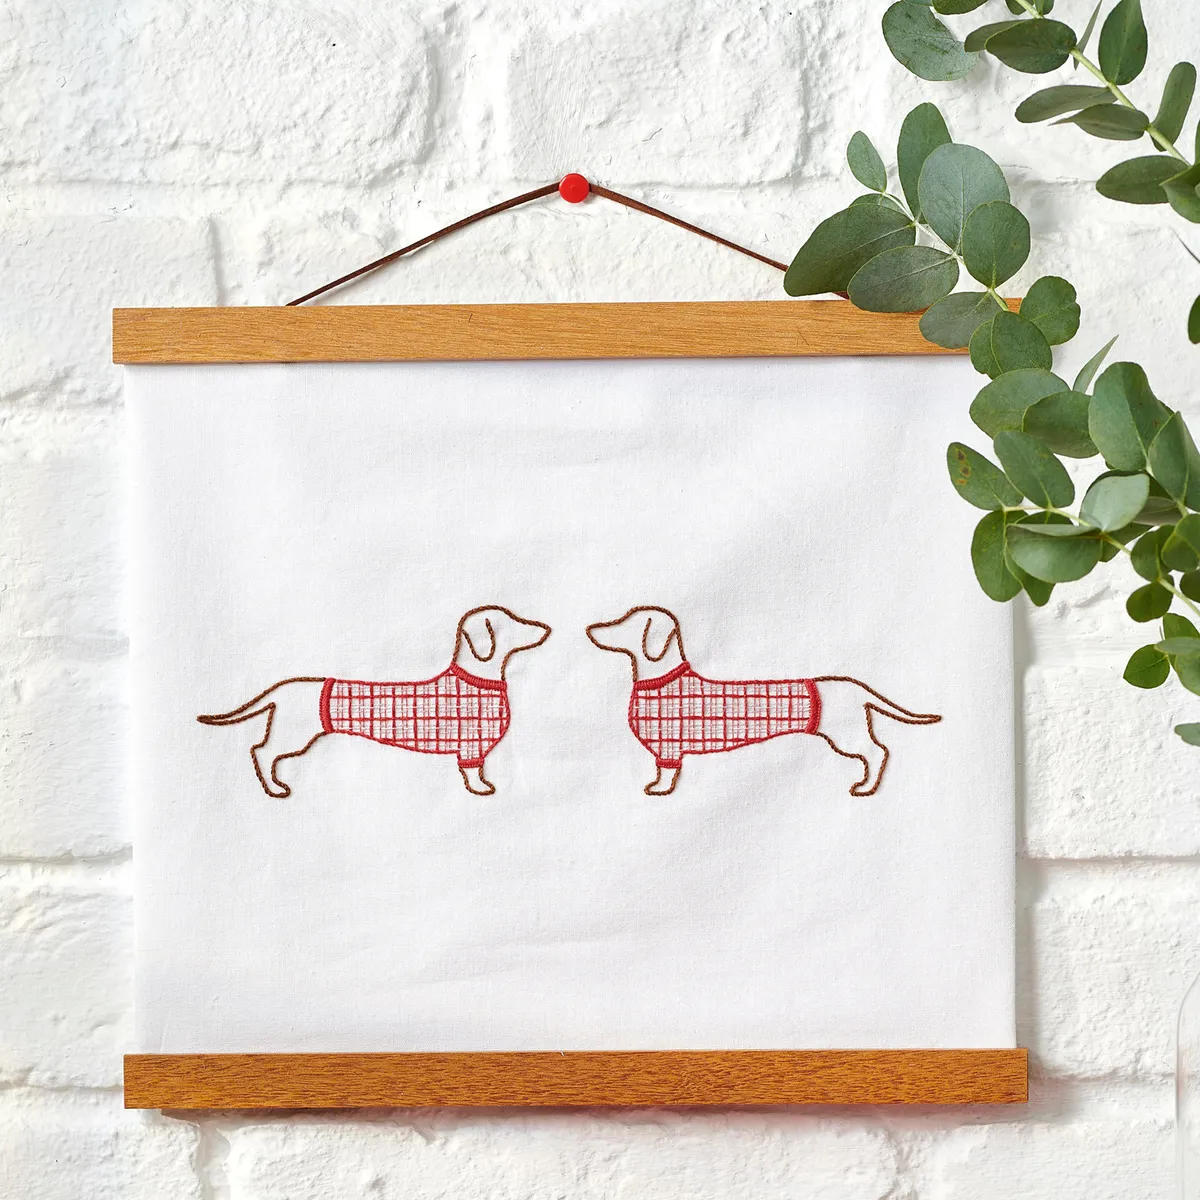 Tartan sausage dog banner from Love Embroidery issue 19